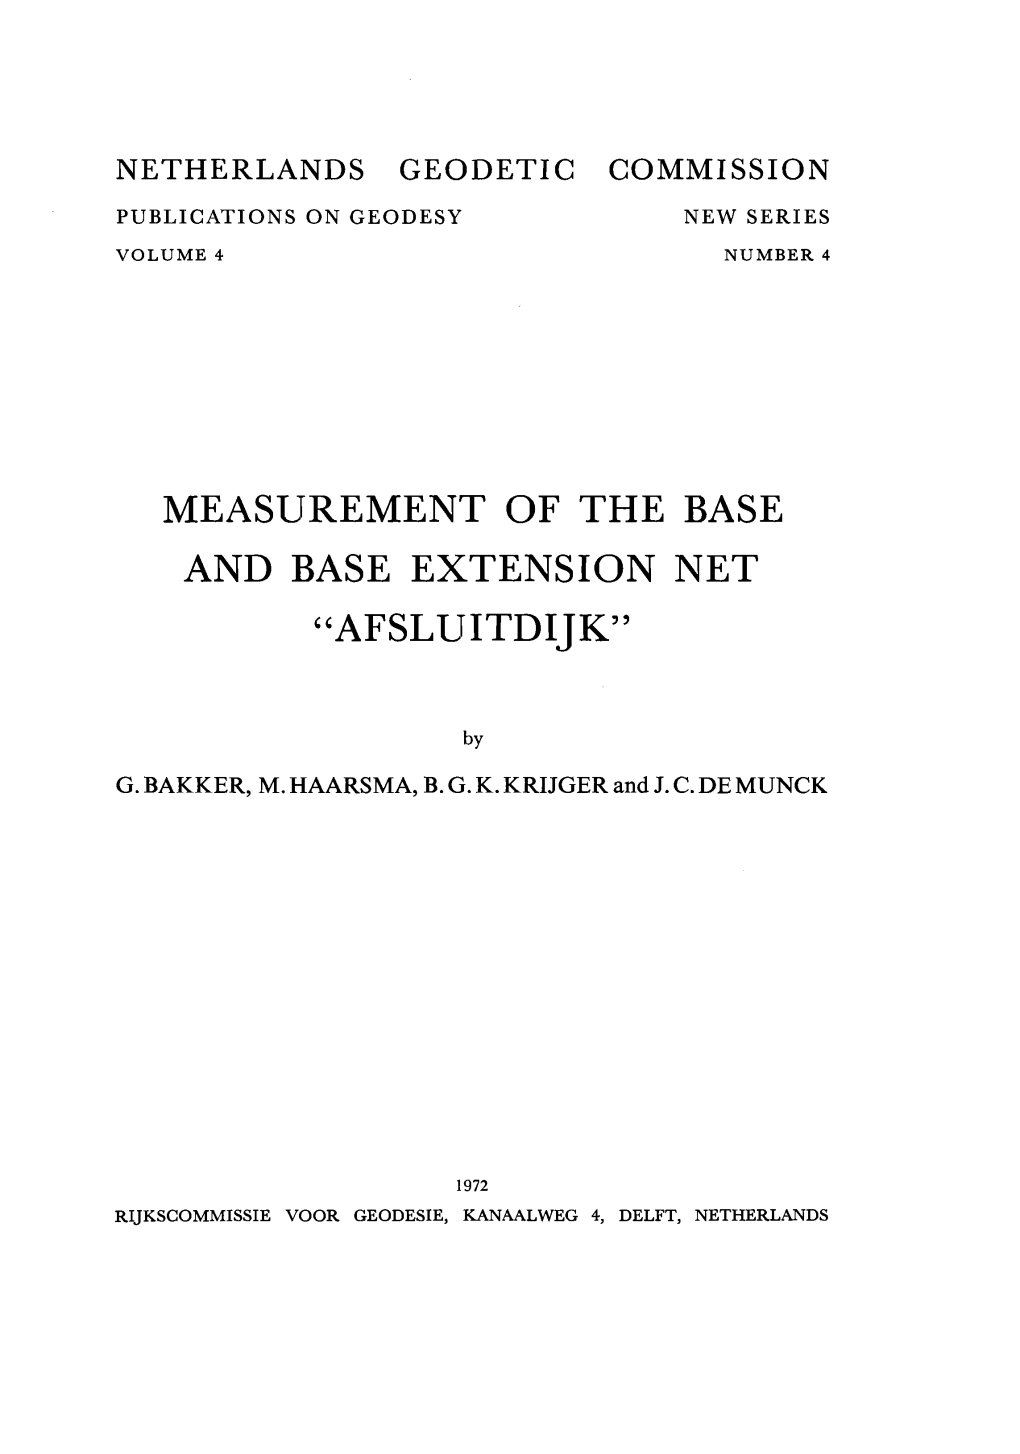 Measurement of the Base and Base Extension Net